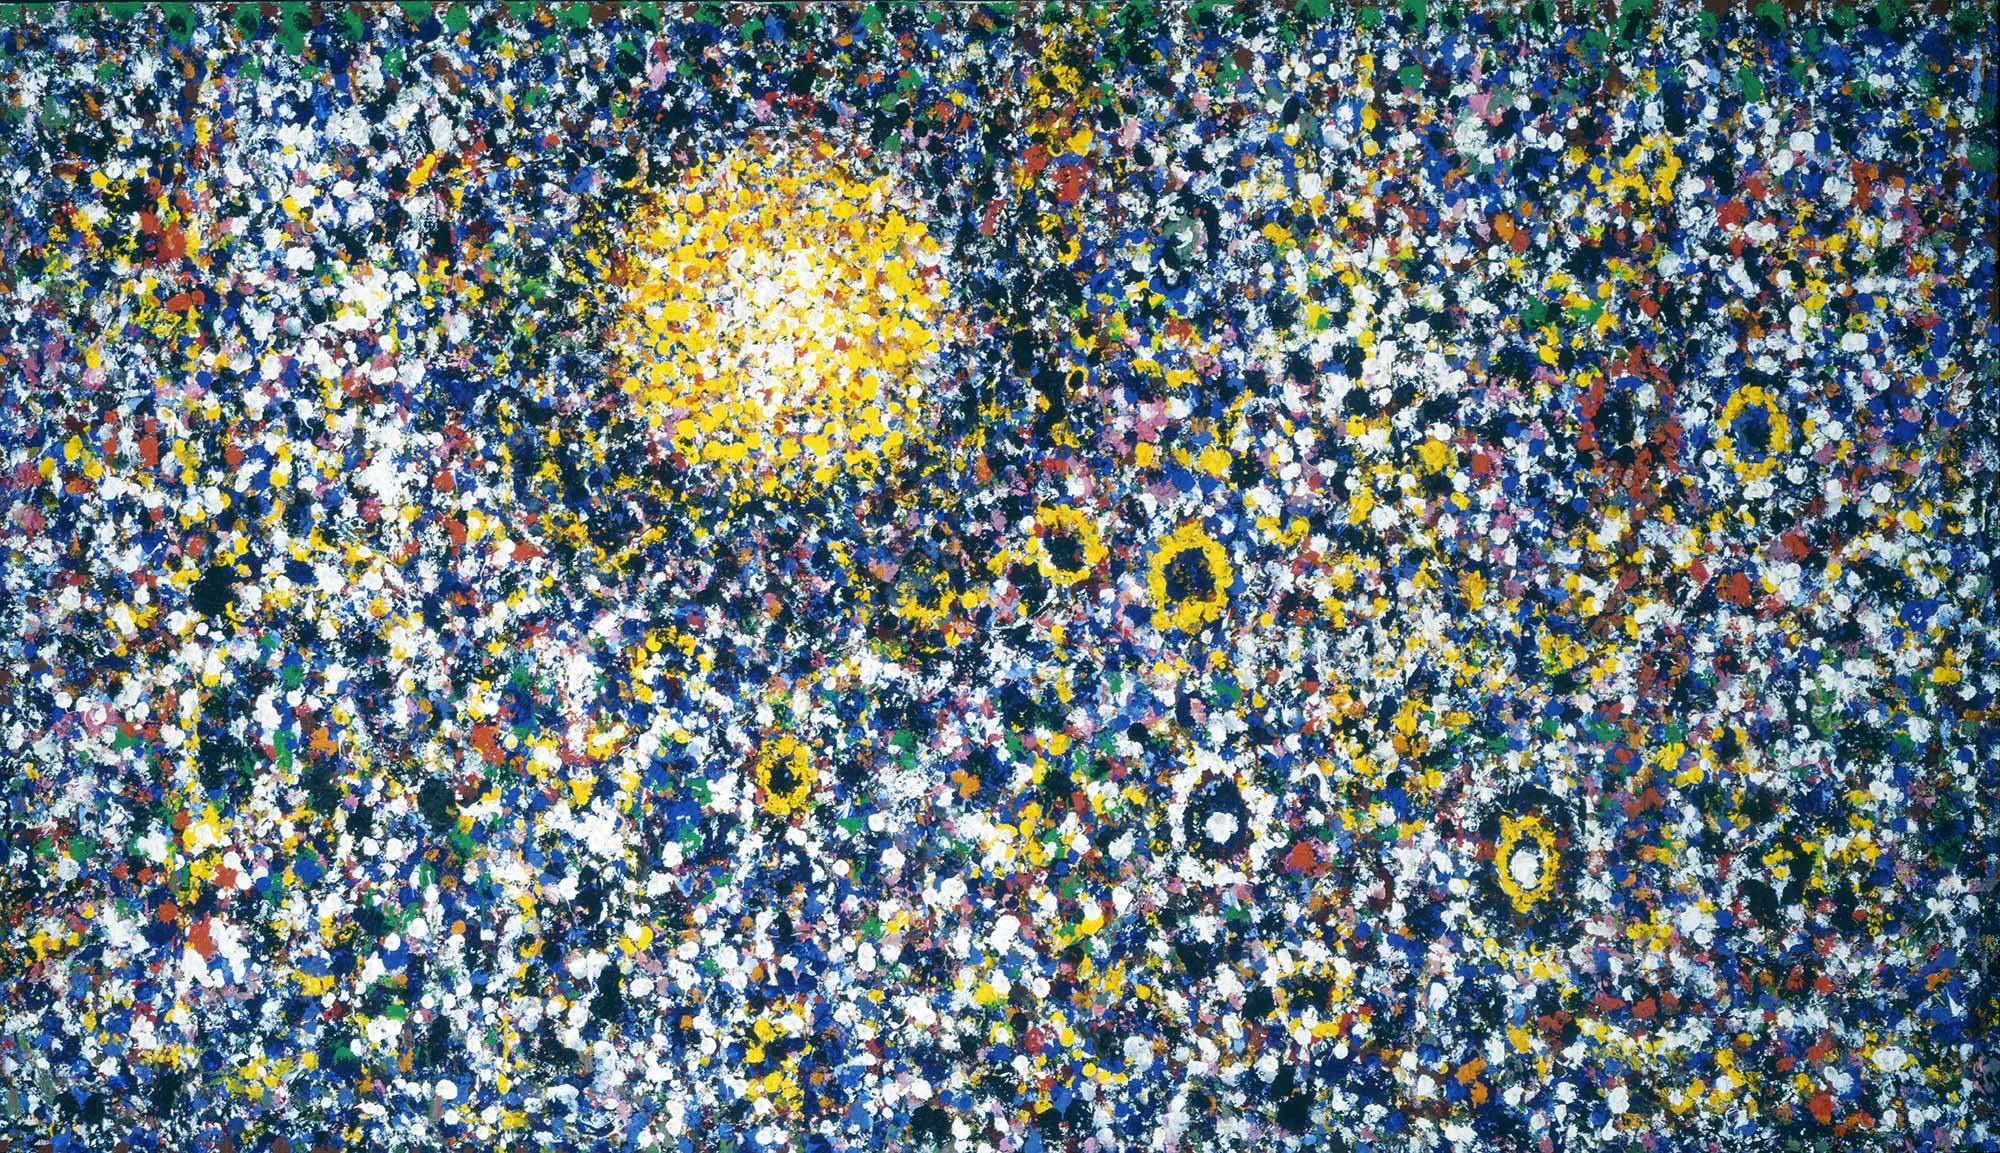 Dance of Earth and Stars
1987–90
Acrylic on linen
42 x 72 in. (106.7 x 182.9 cm)
The White House Collection
 – The Richard Pousette-Dart Foundation